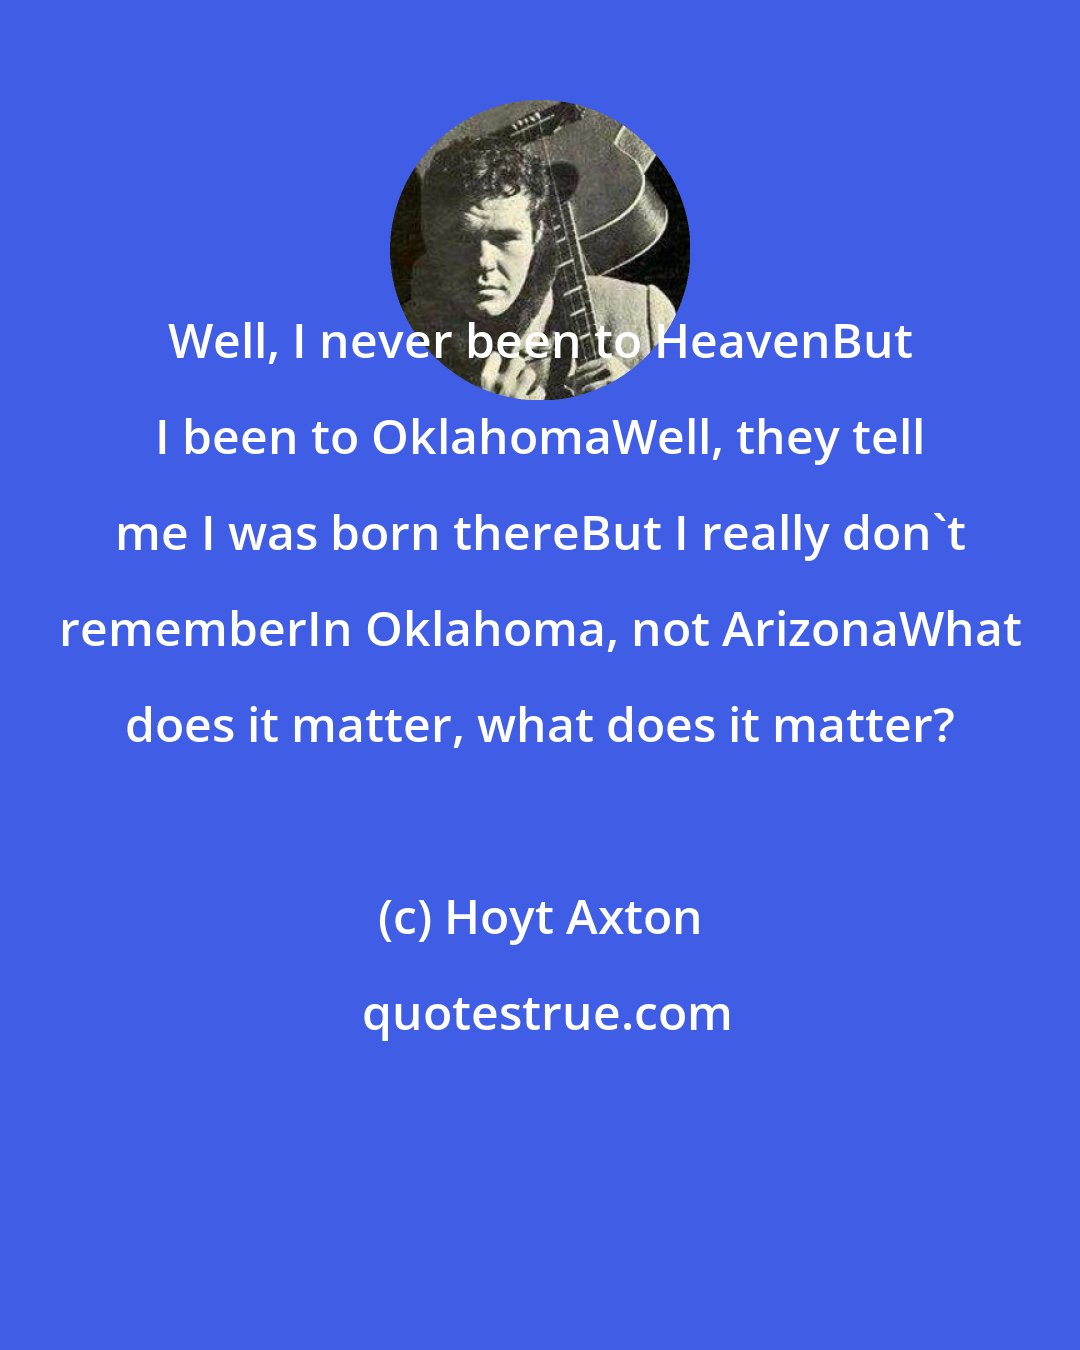 Hoyt Axton: Well, I never been to HeavenBut I been to OklahomaWell, they tell me I was born thereBut I really don't rememberIn Oklahoma, not ArizonaWhat does it matter, what does it matter?